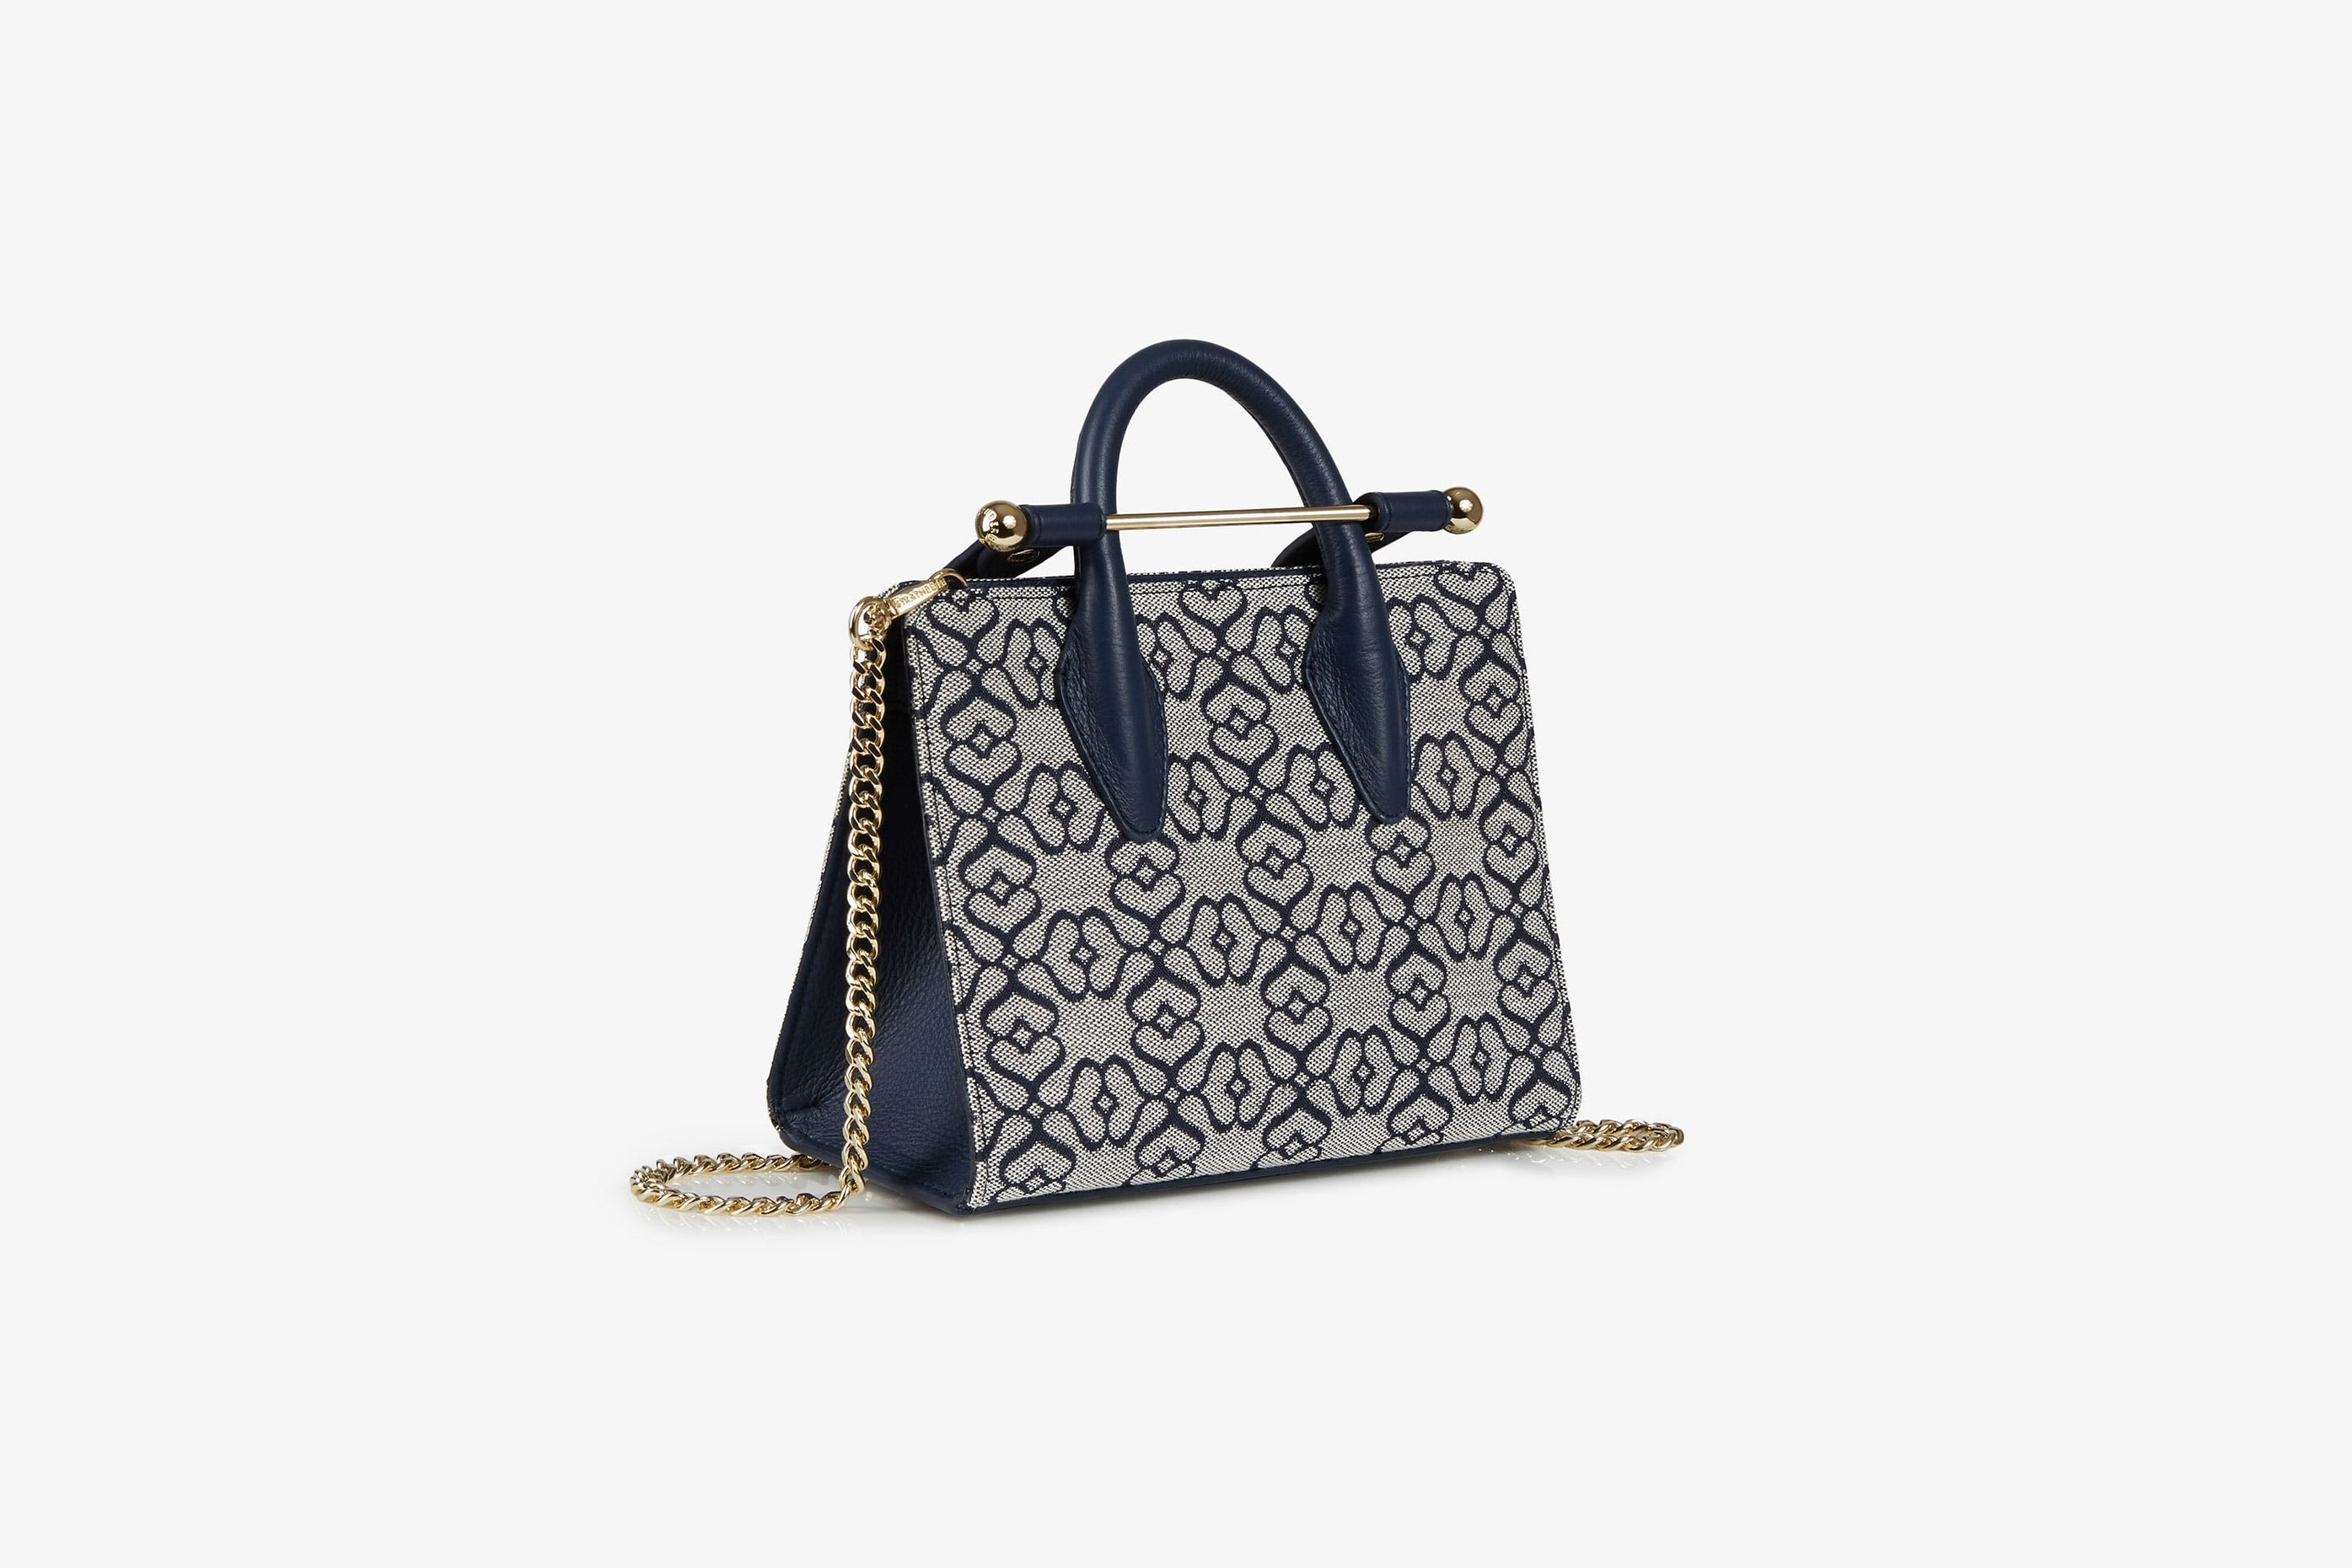 A view showcasing our The Strathberry Nano Tote - Monogram Jacquard/Leather Light Navy